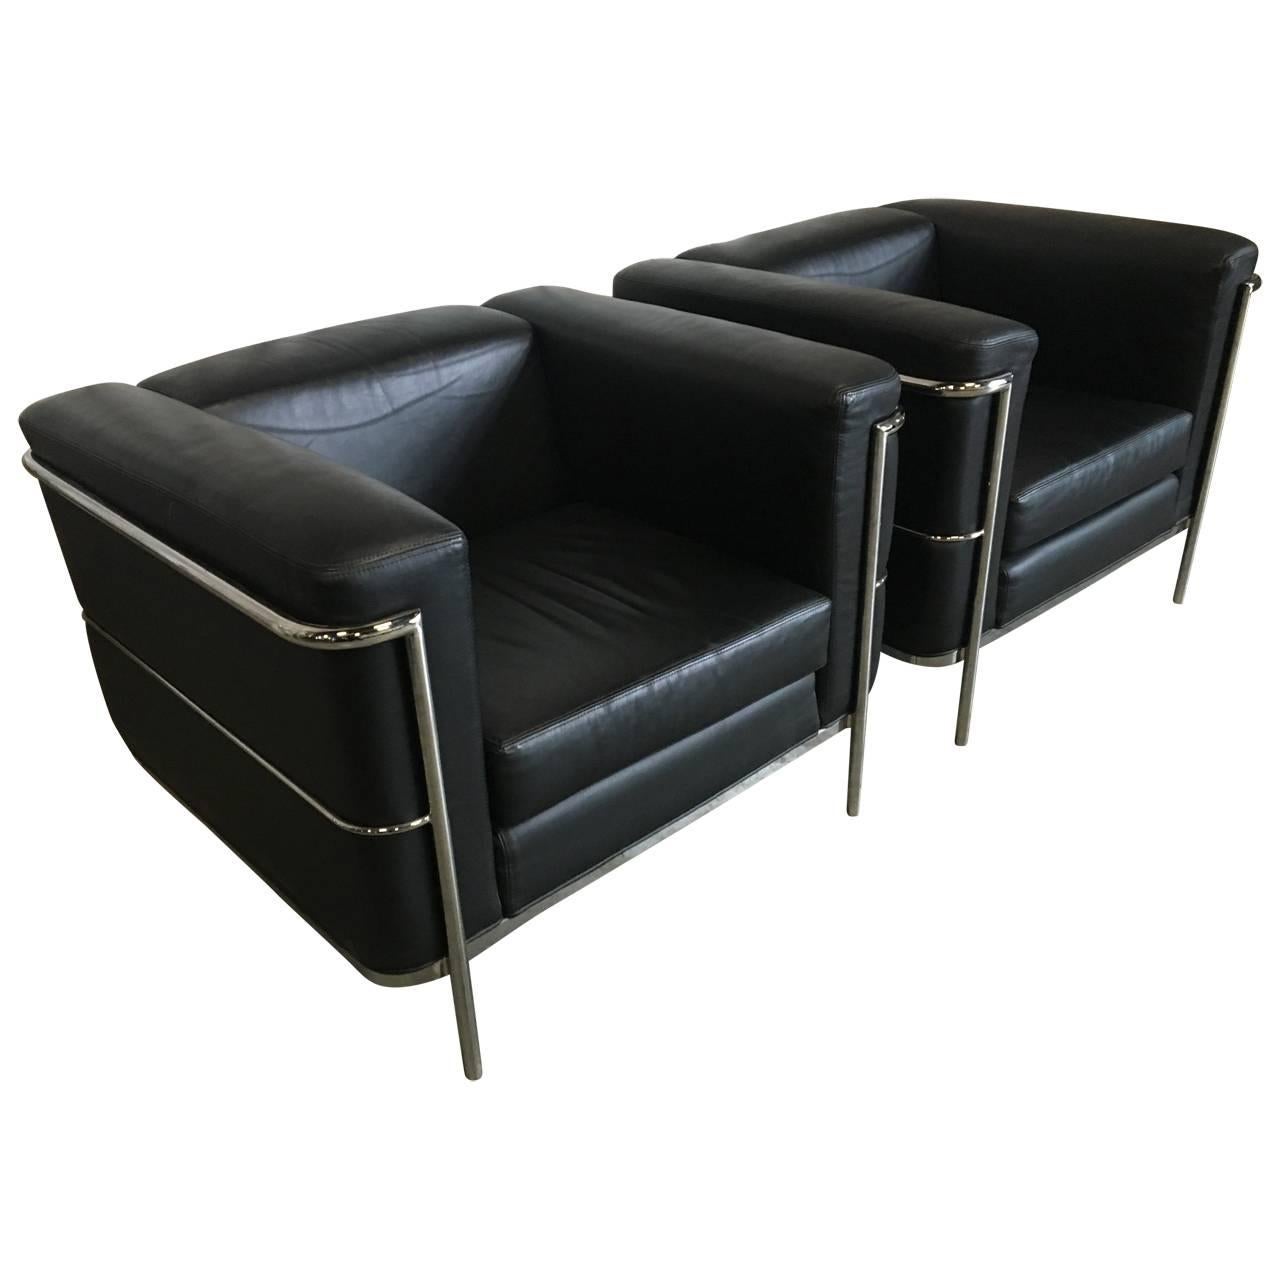 Pair of Lounge Chairs by Jack Cartwright In Black Leather